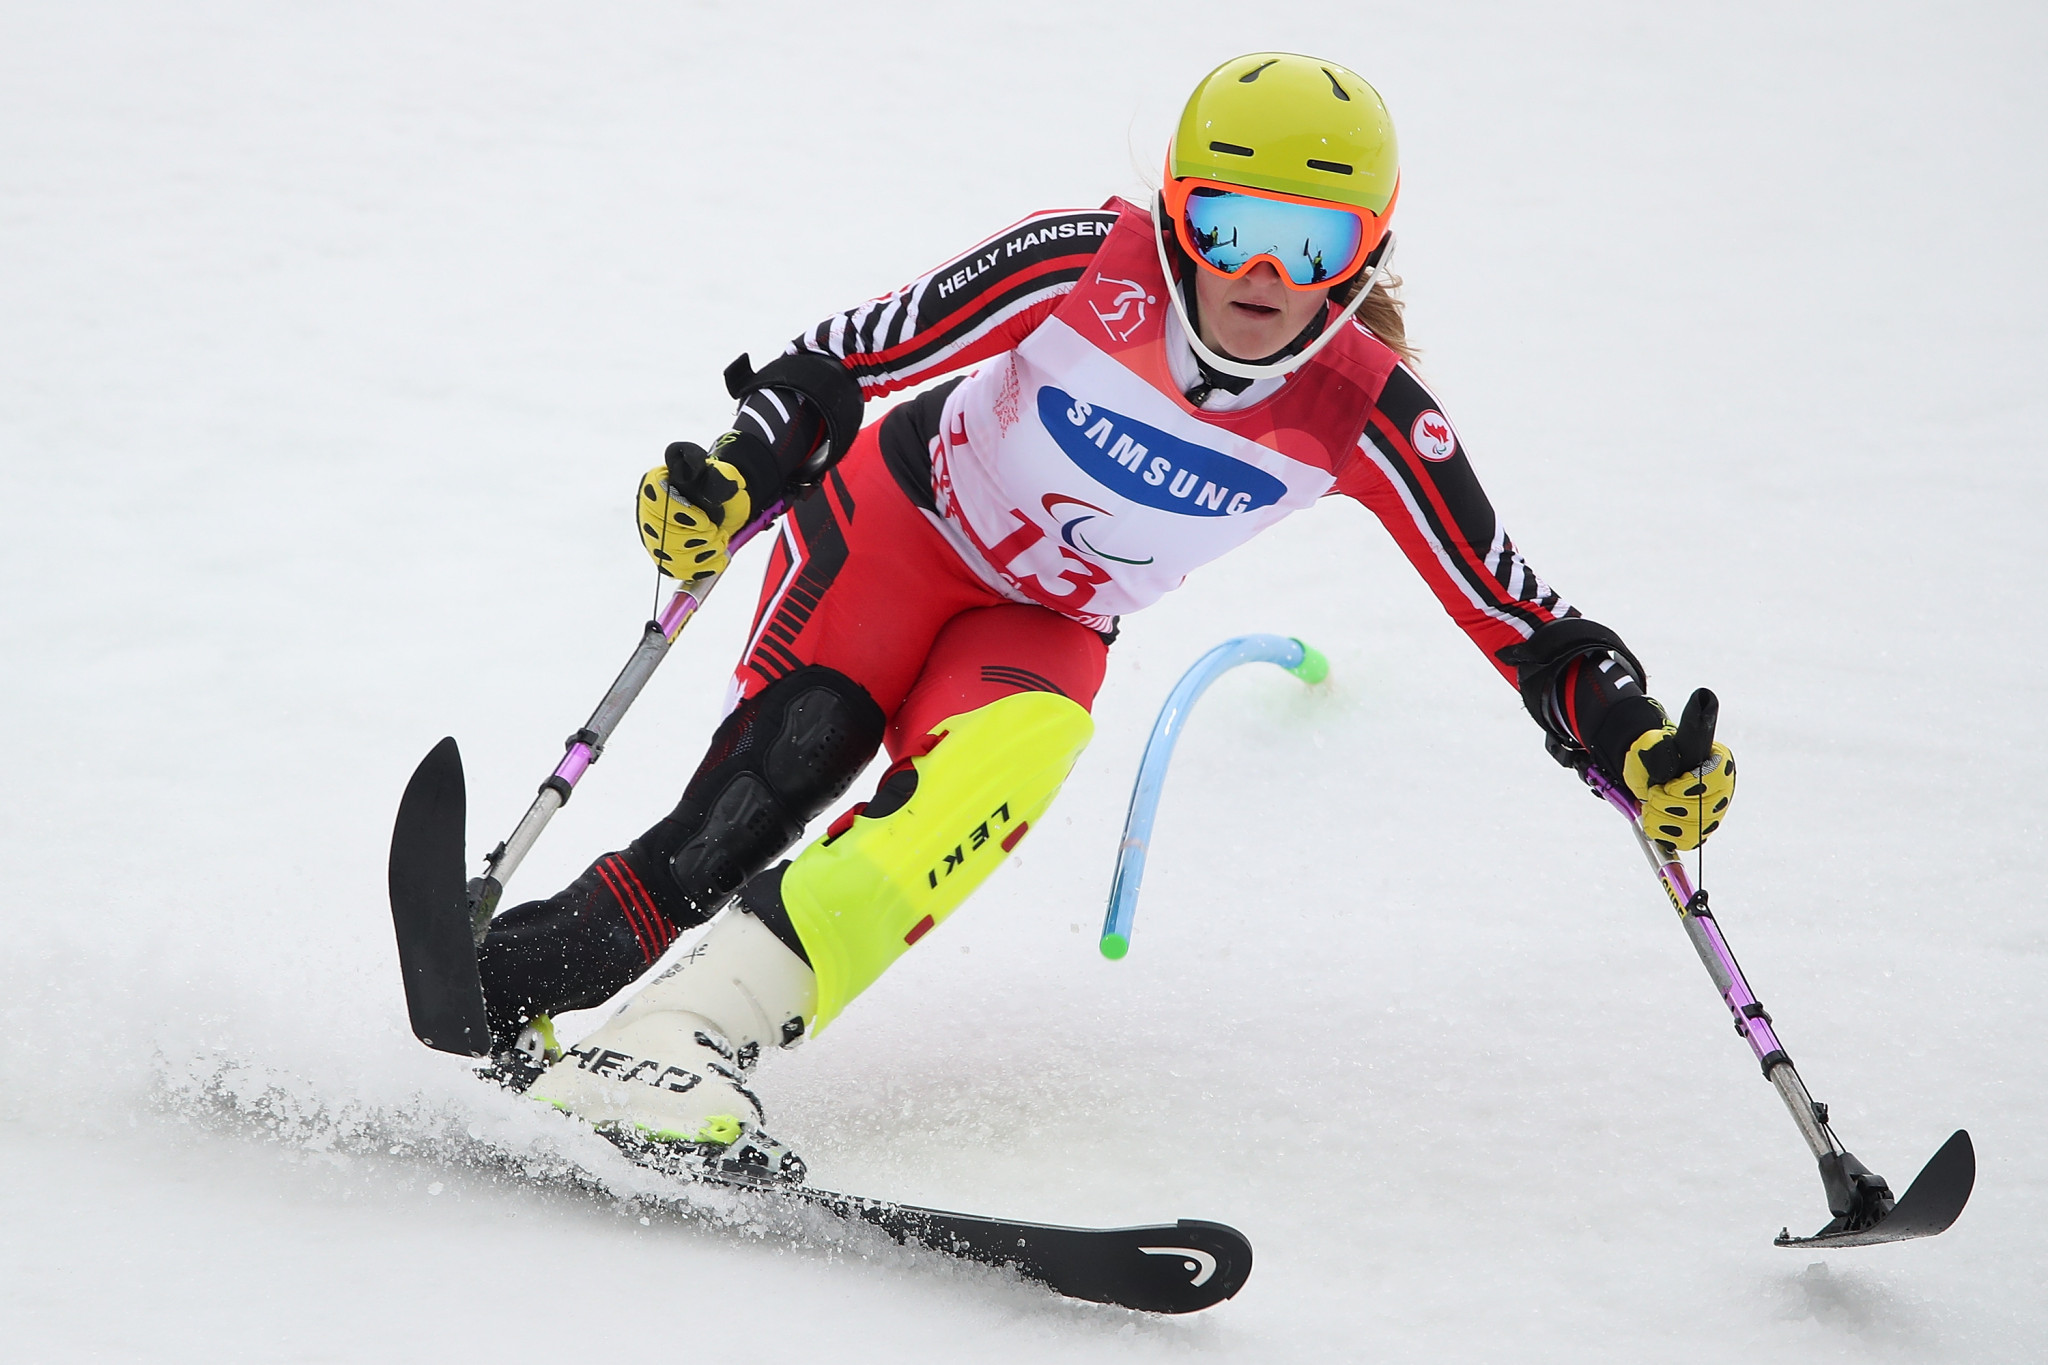 World Para Snow Sports is due to hold the first part of the classifier course next European spring ©Getty Images